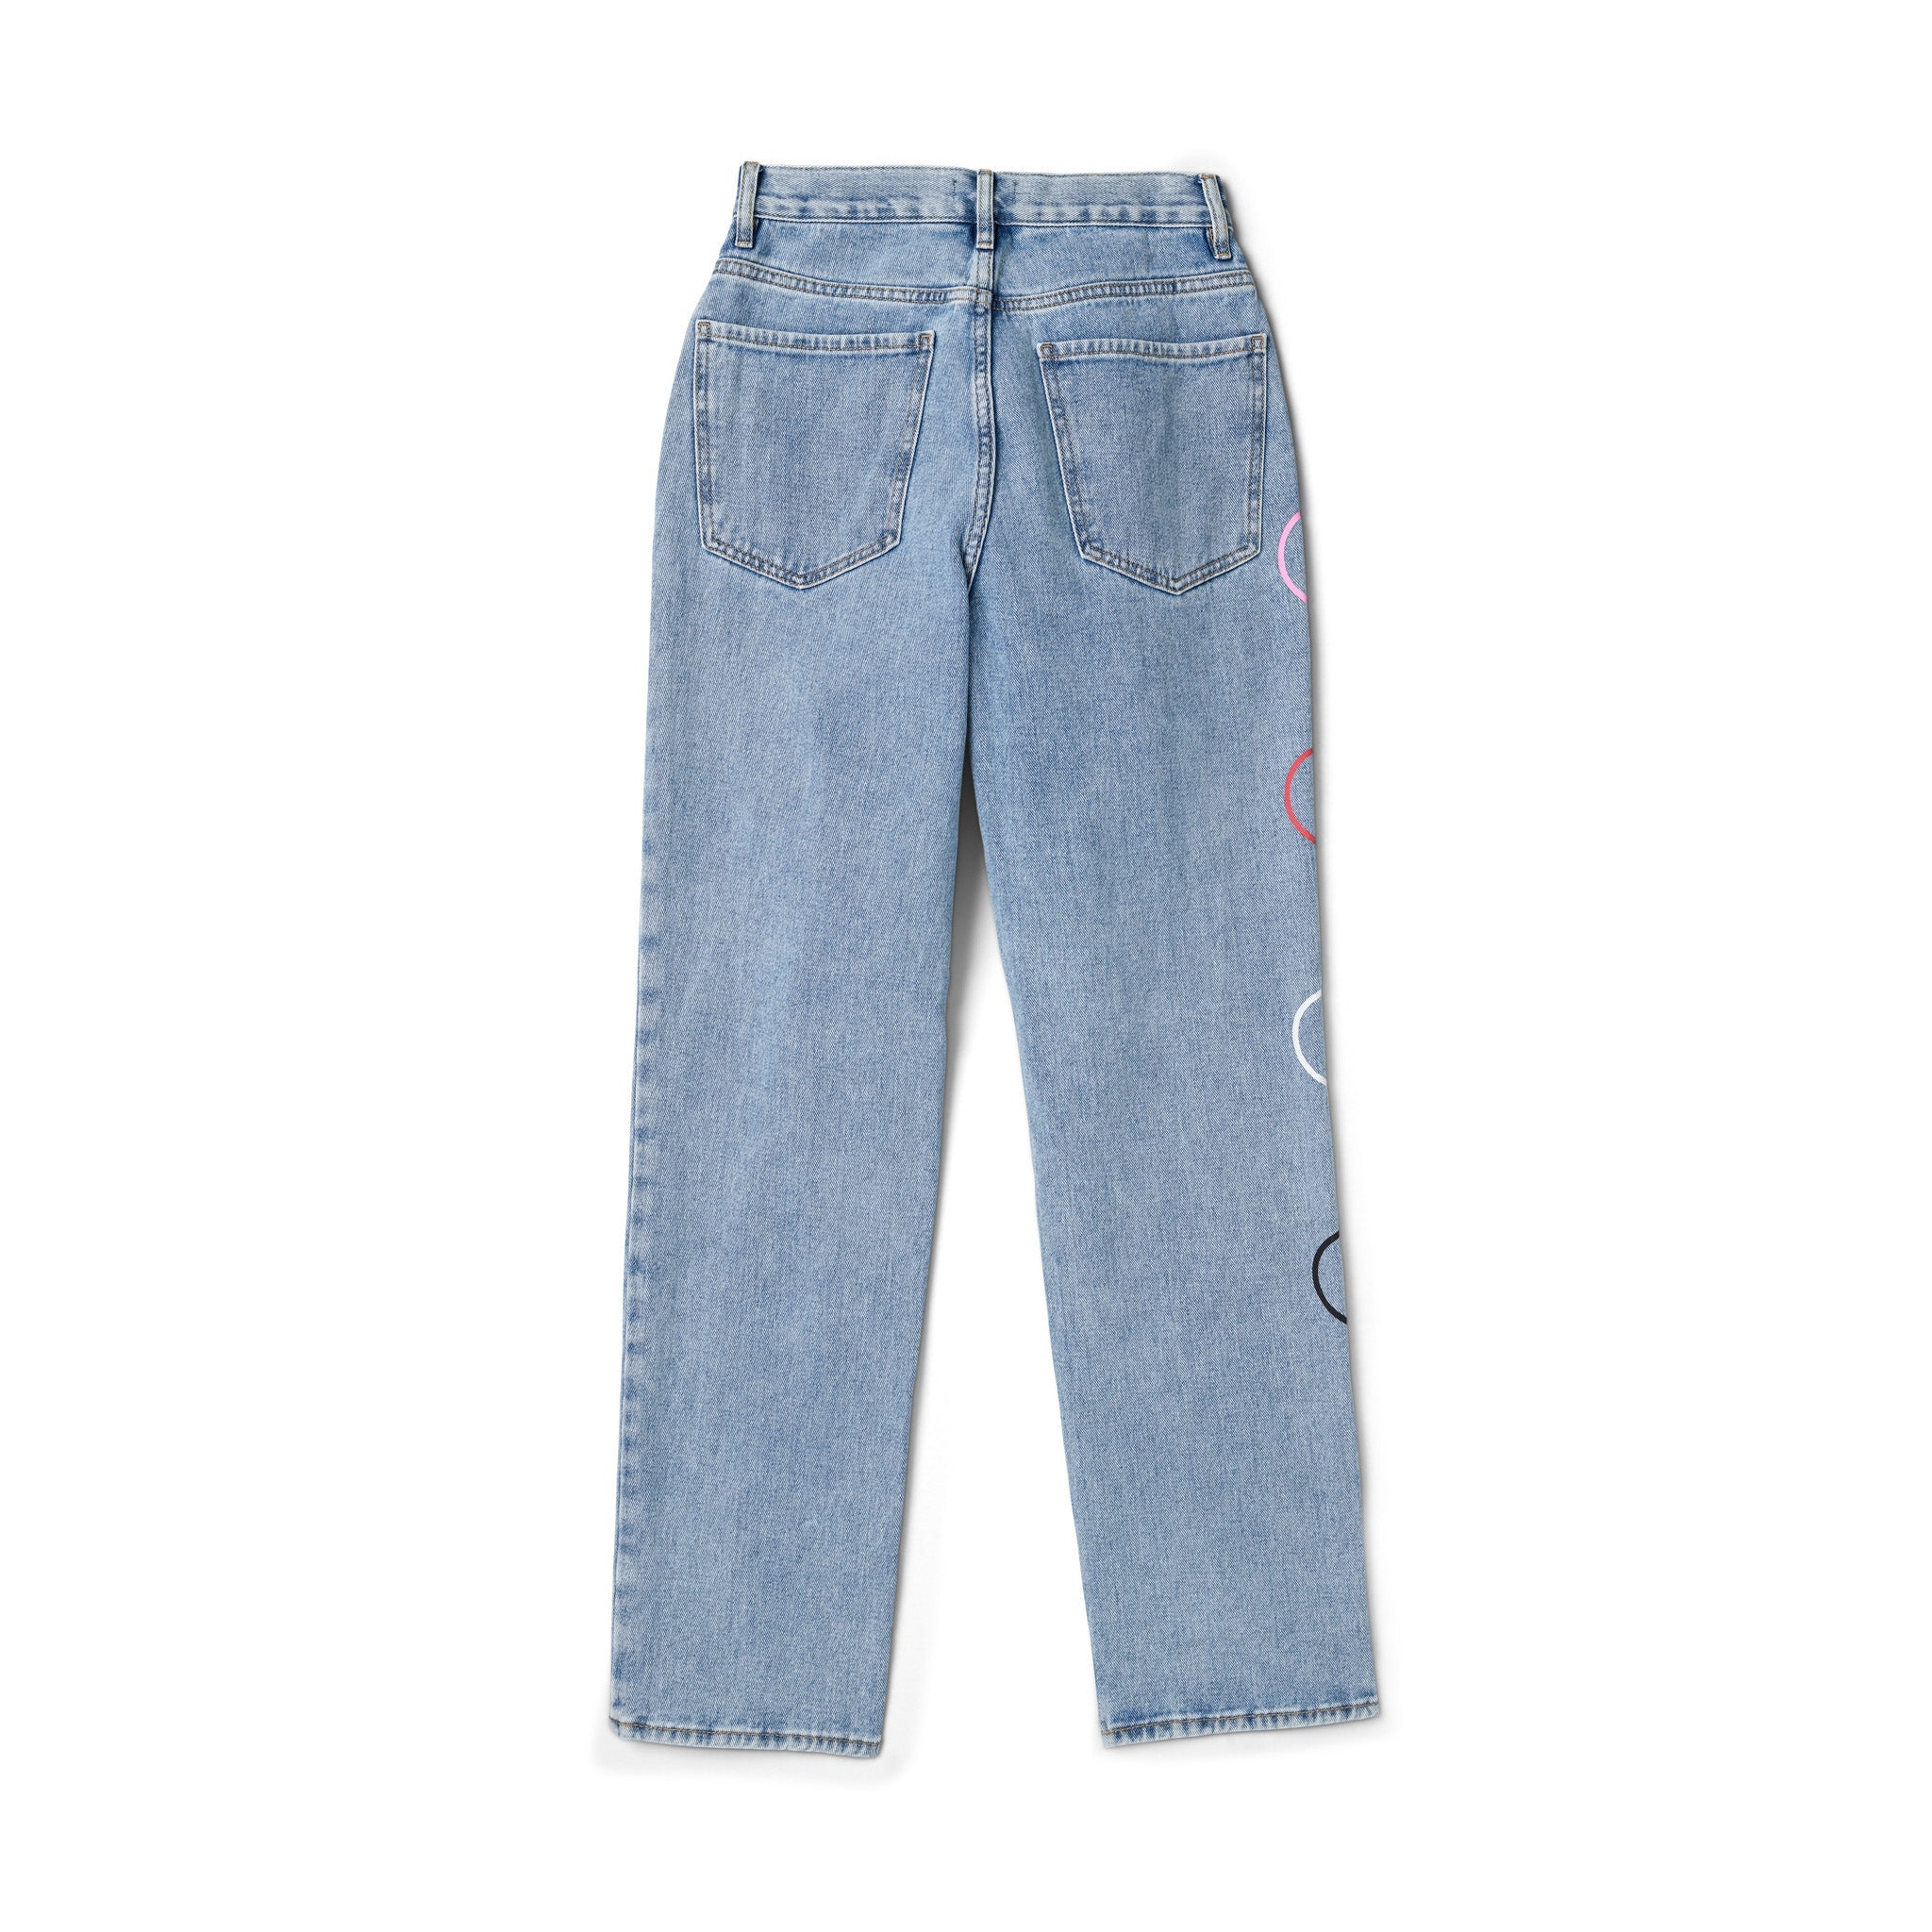 Jeans & Trousers | Lite Blue Jeans | Freeup